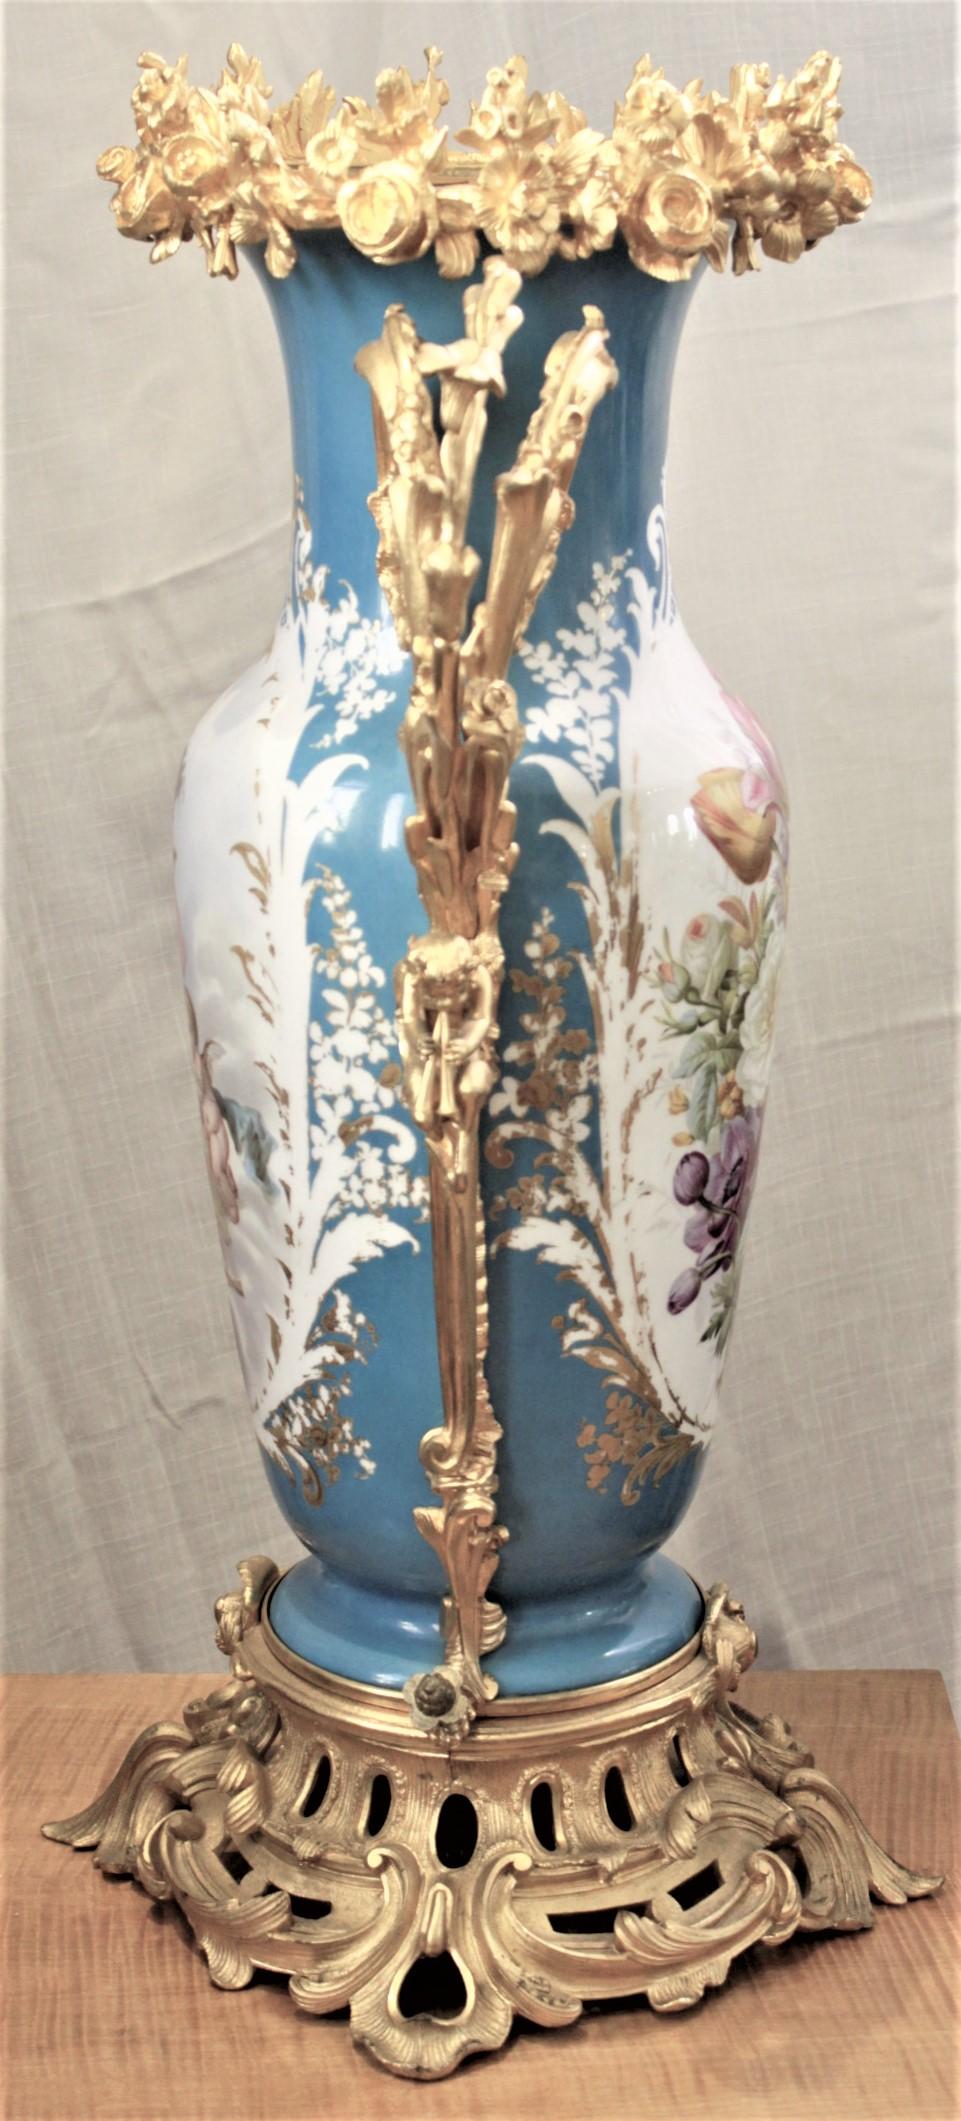 Large Antique Sevres Styled Hand-Painted Porcelain Vase with Gilt Bronze Mounts In Good Condition For Sale In Hamilton, Ontario